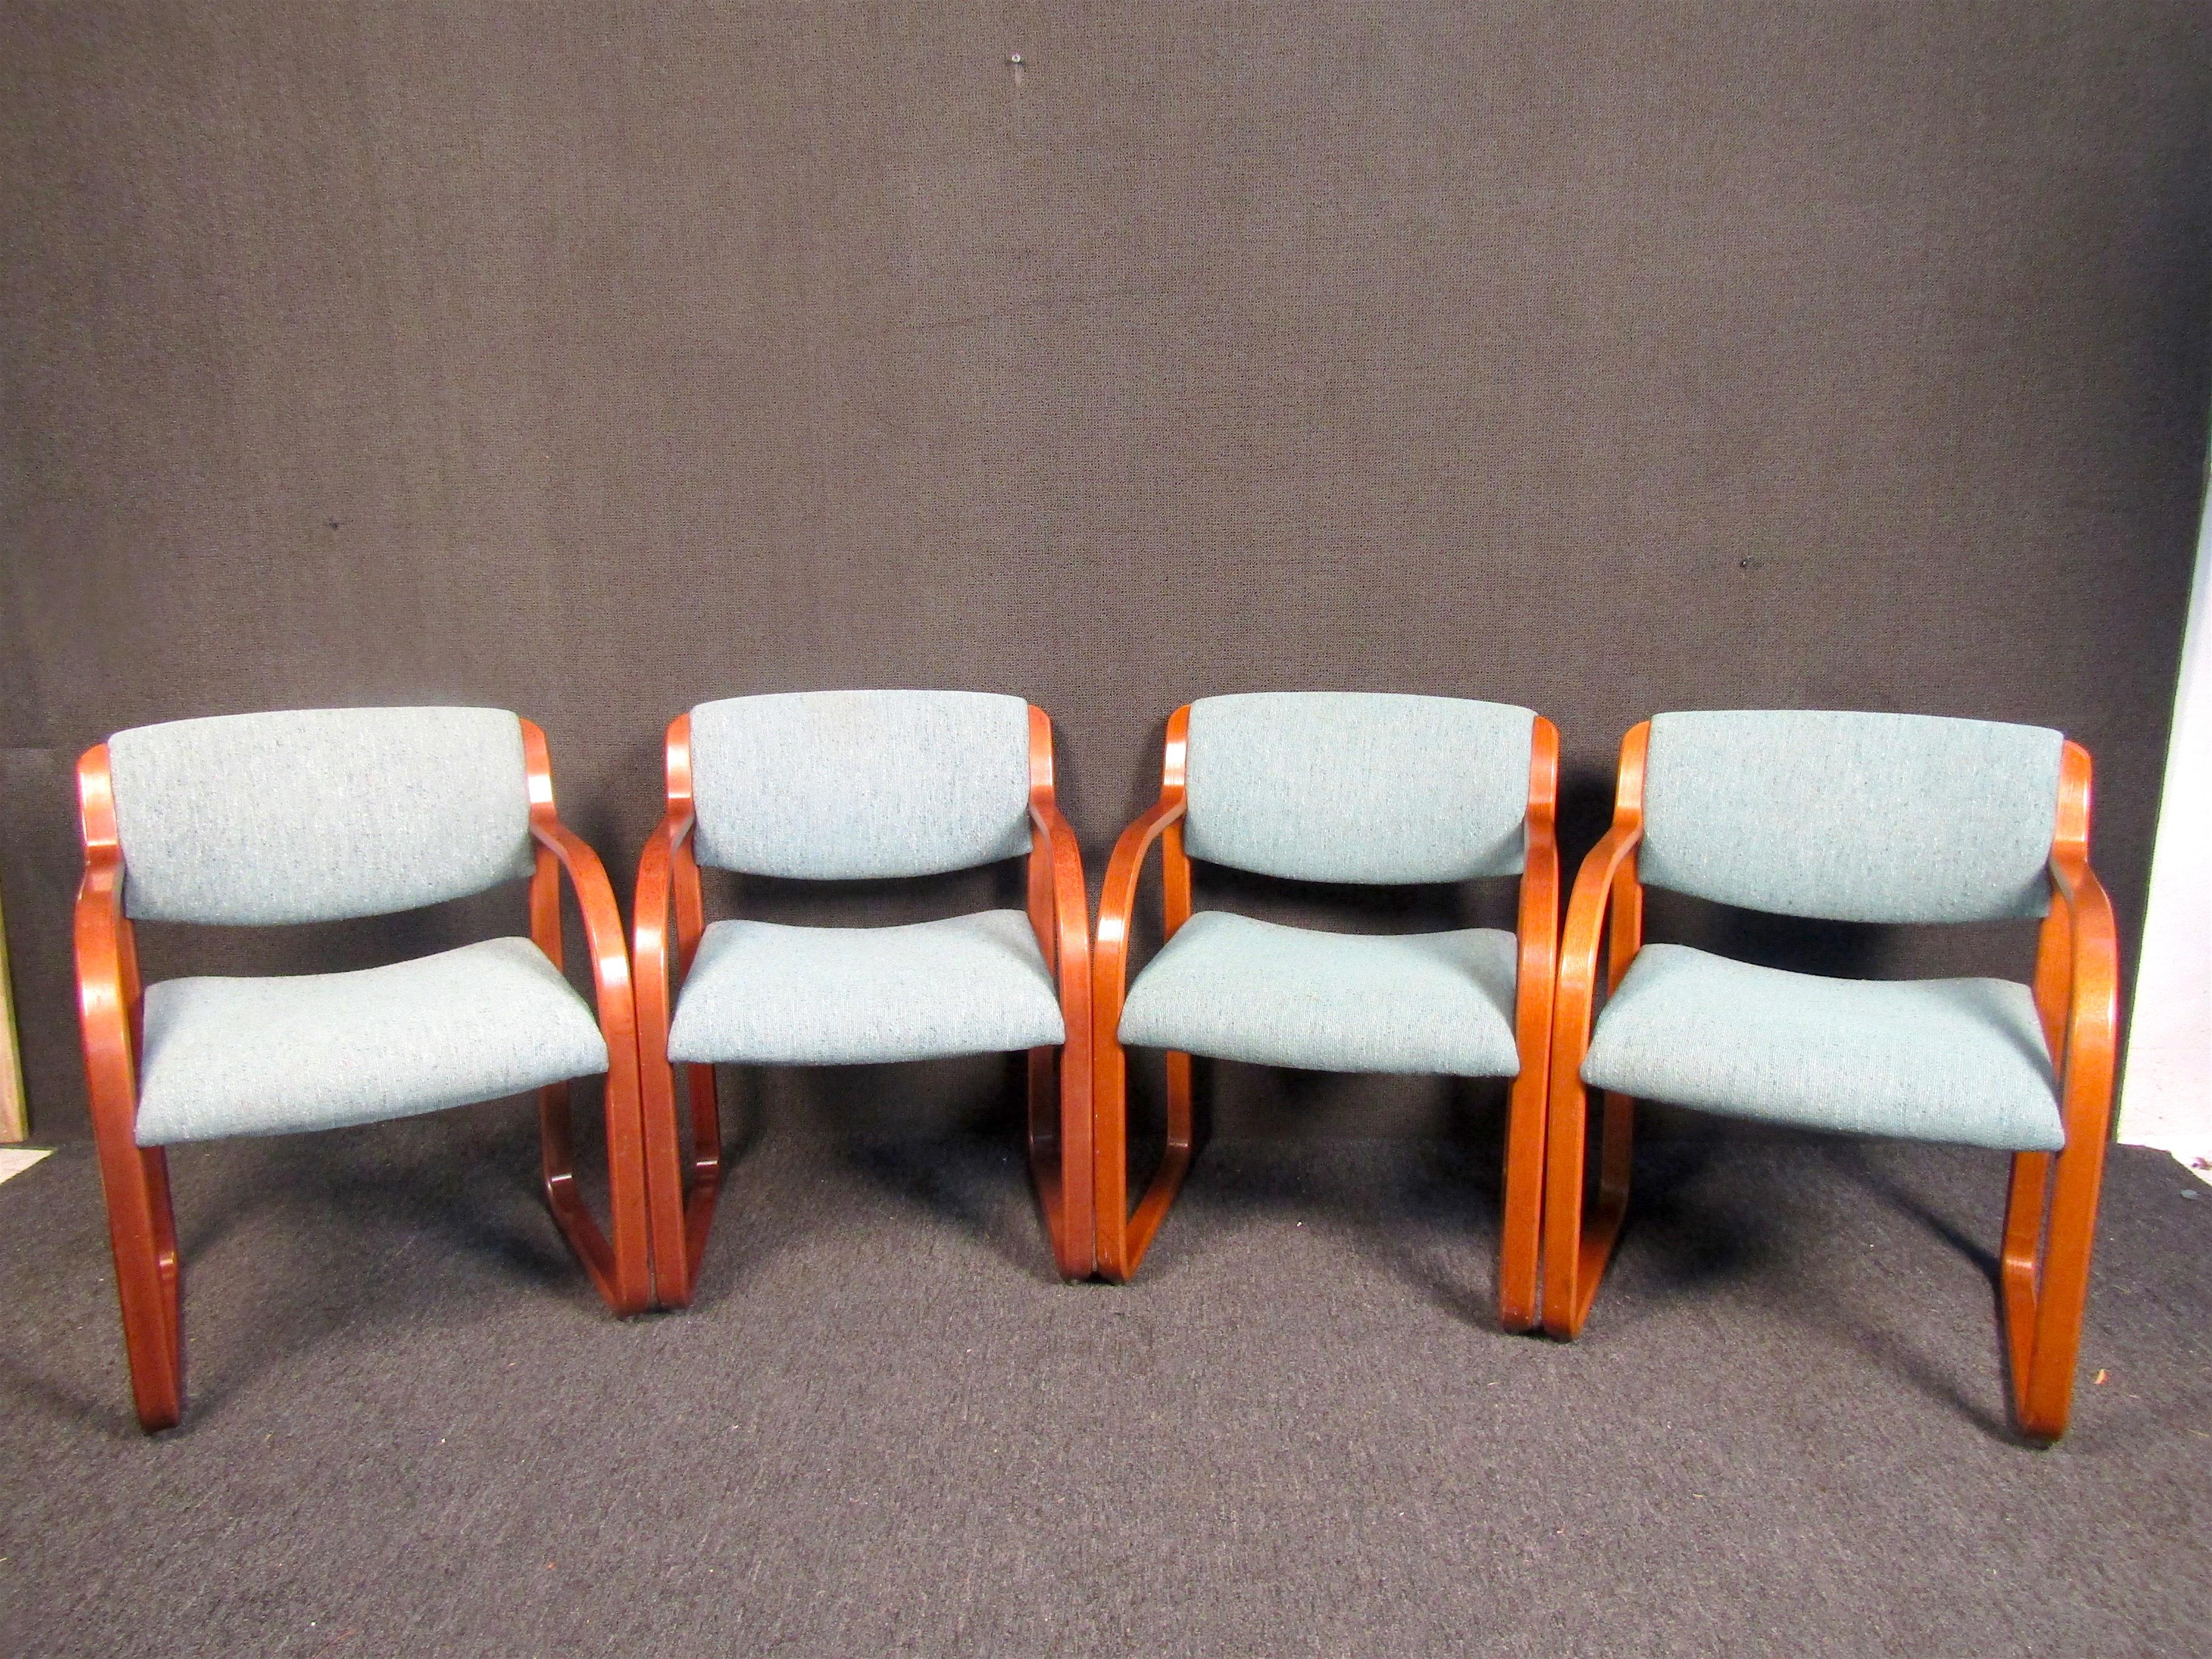 (4) Vintage Steelcase office chairs. These chairs feature all bentwood frames and green upholstered seats. Perfect for any studio, office or workspace setting.

(Please confirm item location - NY or NJ - with dealer).
 